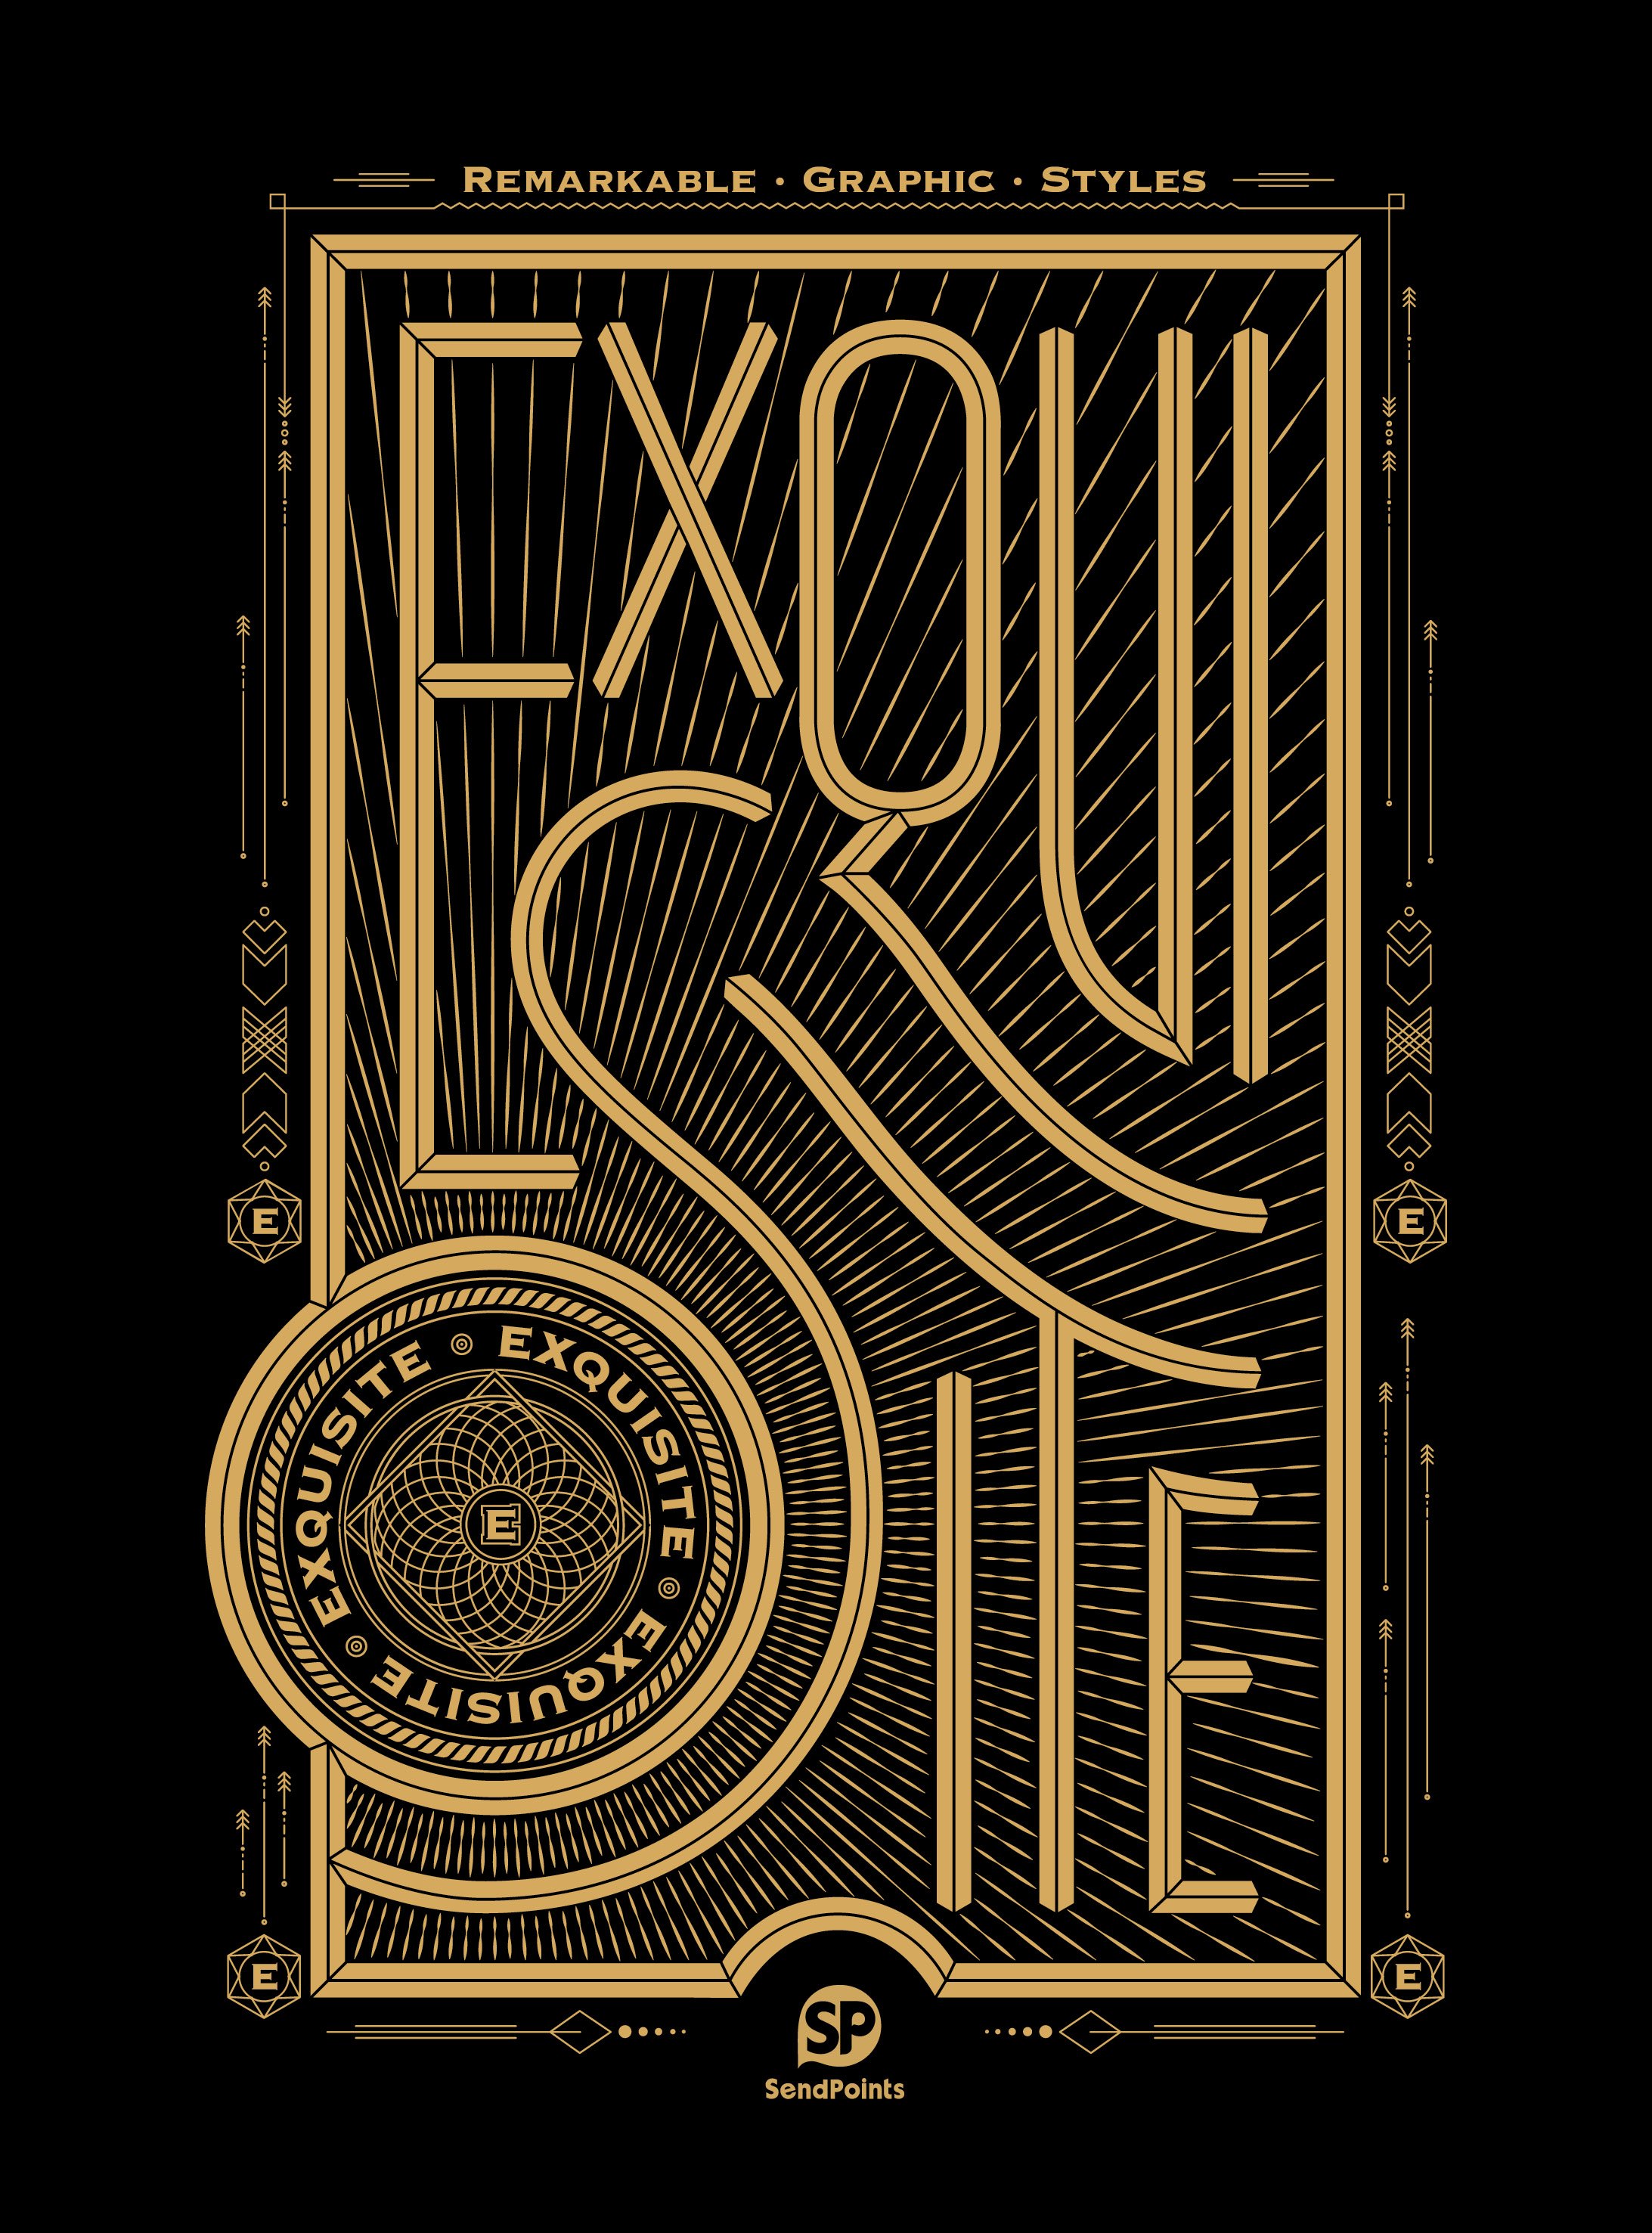 Remarkable Graphic Styles--EXQUISITE 设计五感——精